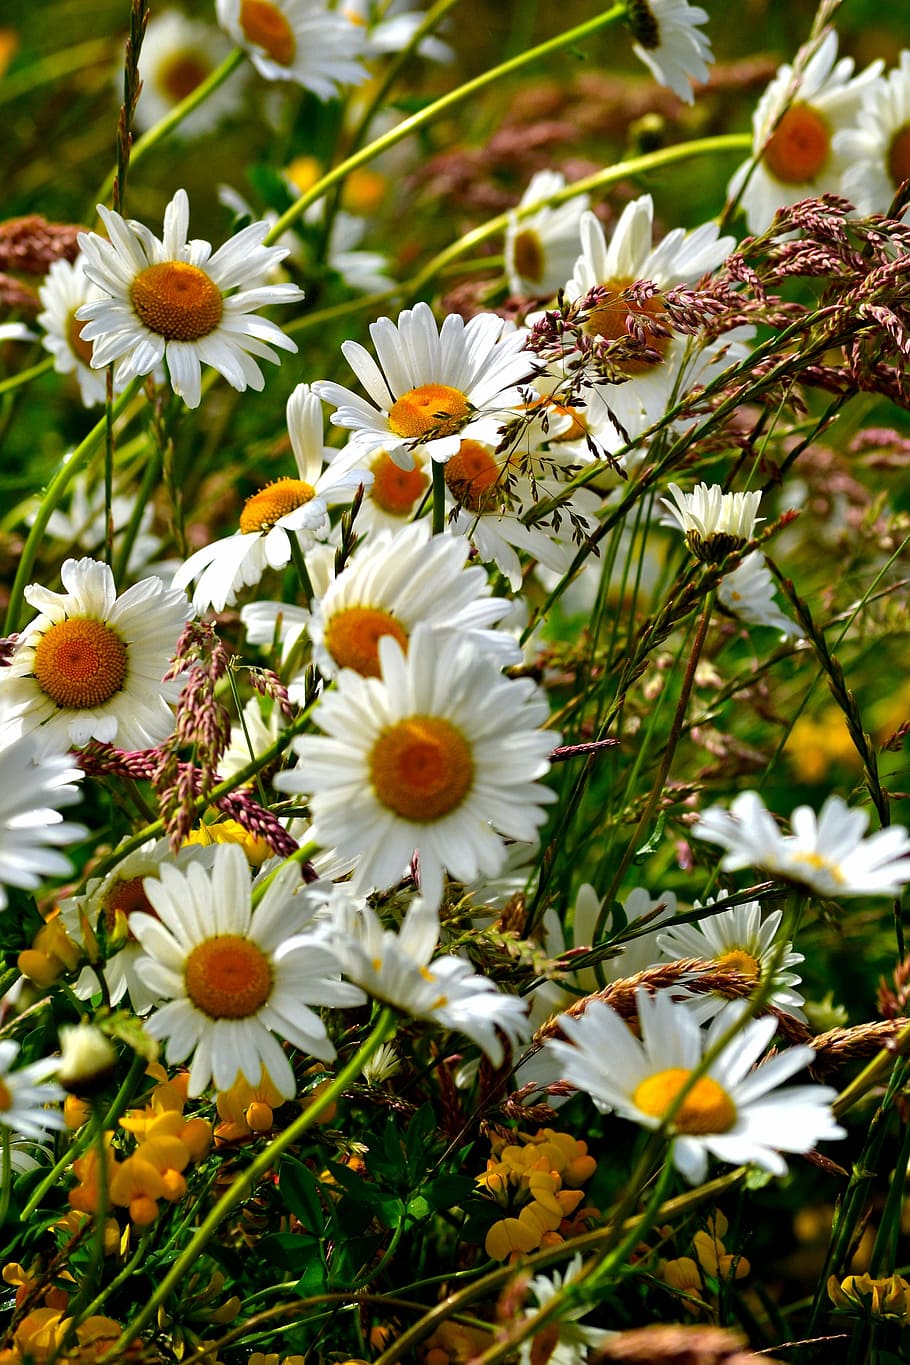 daisies, flowe, flower, blossoms, wild flower, bloom, colorful, petals, nature, daisy